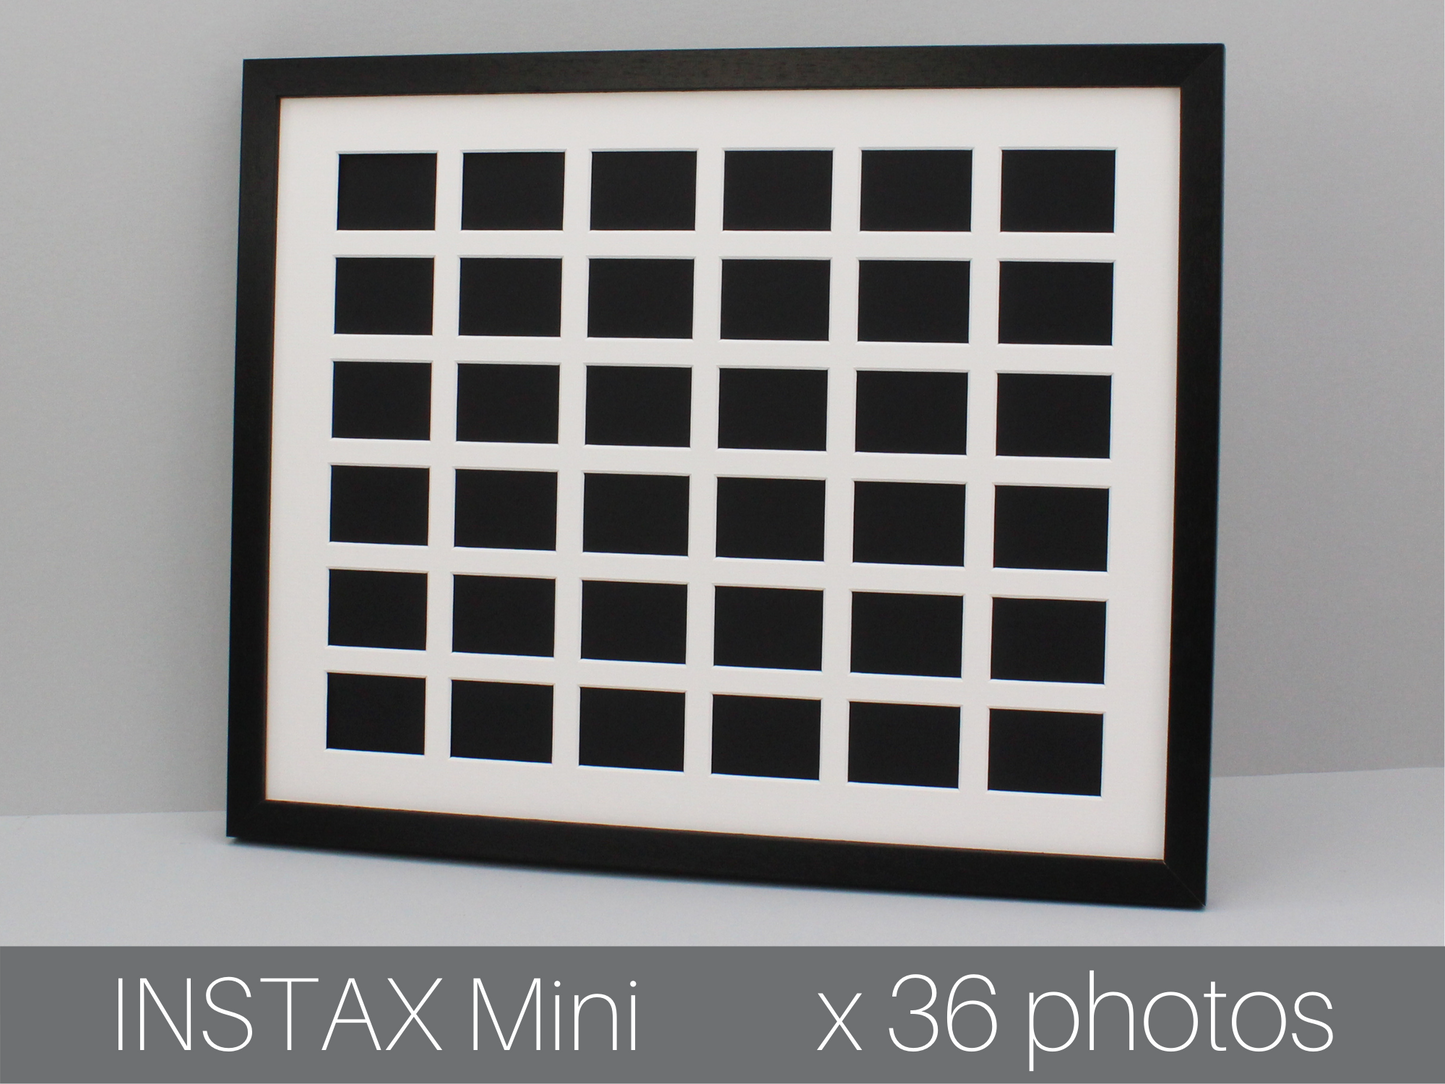 Instax Mini Multi Aperture Wooden Photo Frame. Holds Thirty-Six instax sized Photos. 40x50cm. Portrait or Landscape.